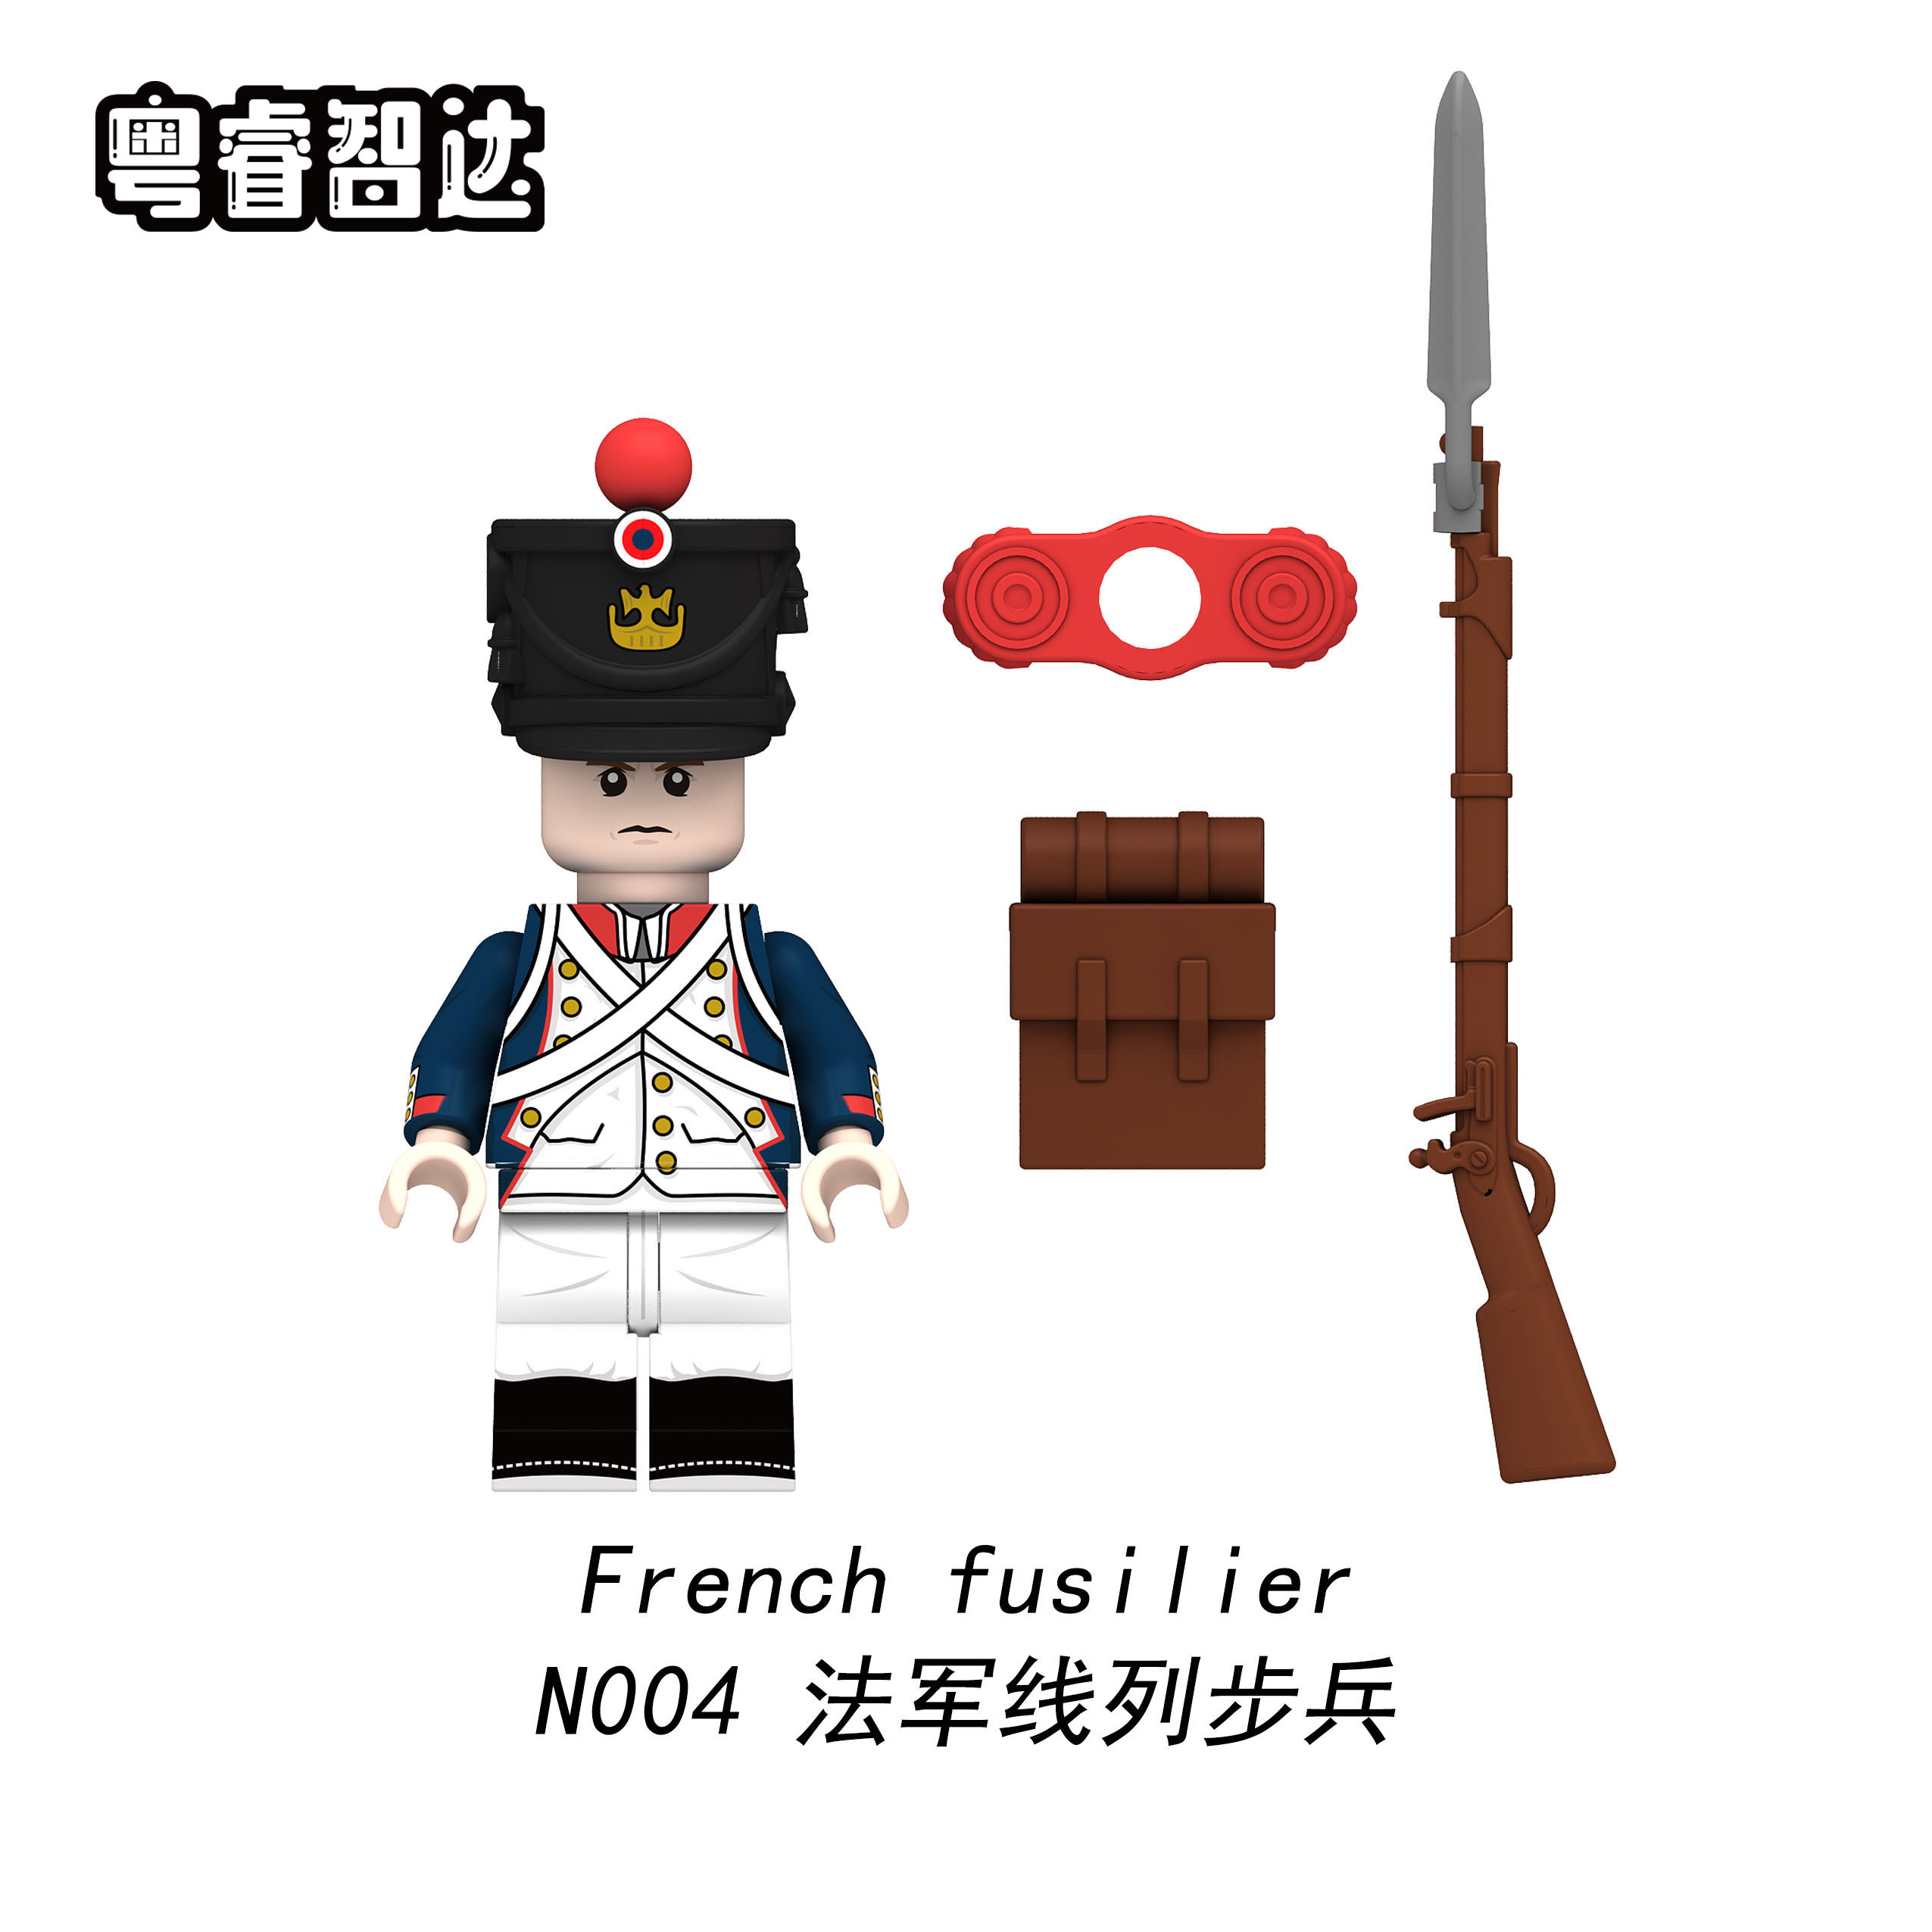 N001 N002 N003 N004 N005 N006 N007 N008 N009 N010 N011 N012 Soliders Series British Fusilier Scottish bagpiper 95th Rifles Building Blocks Action Figures Educational Toys For Kids Gifts